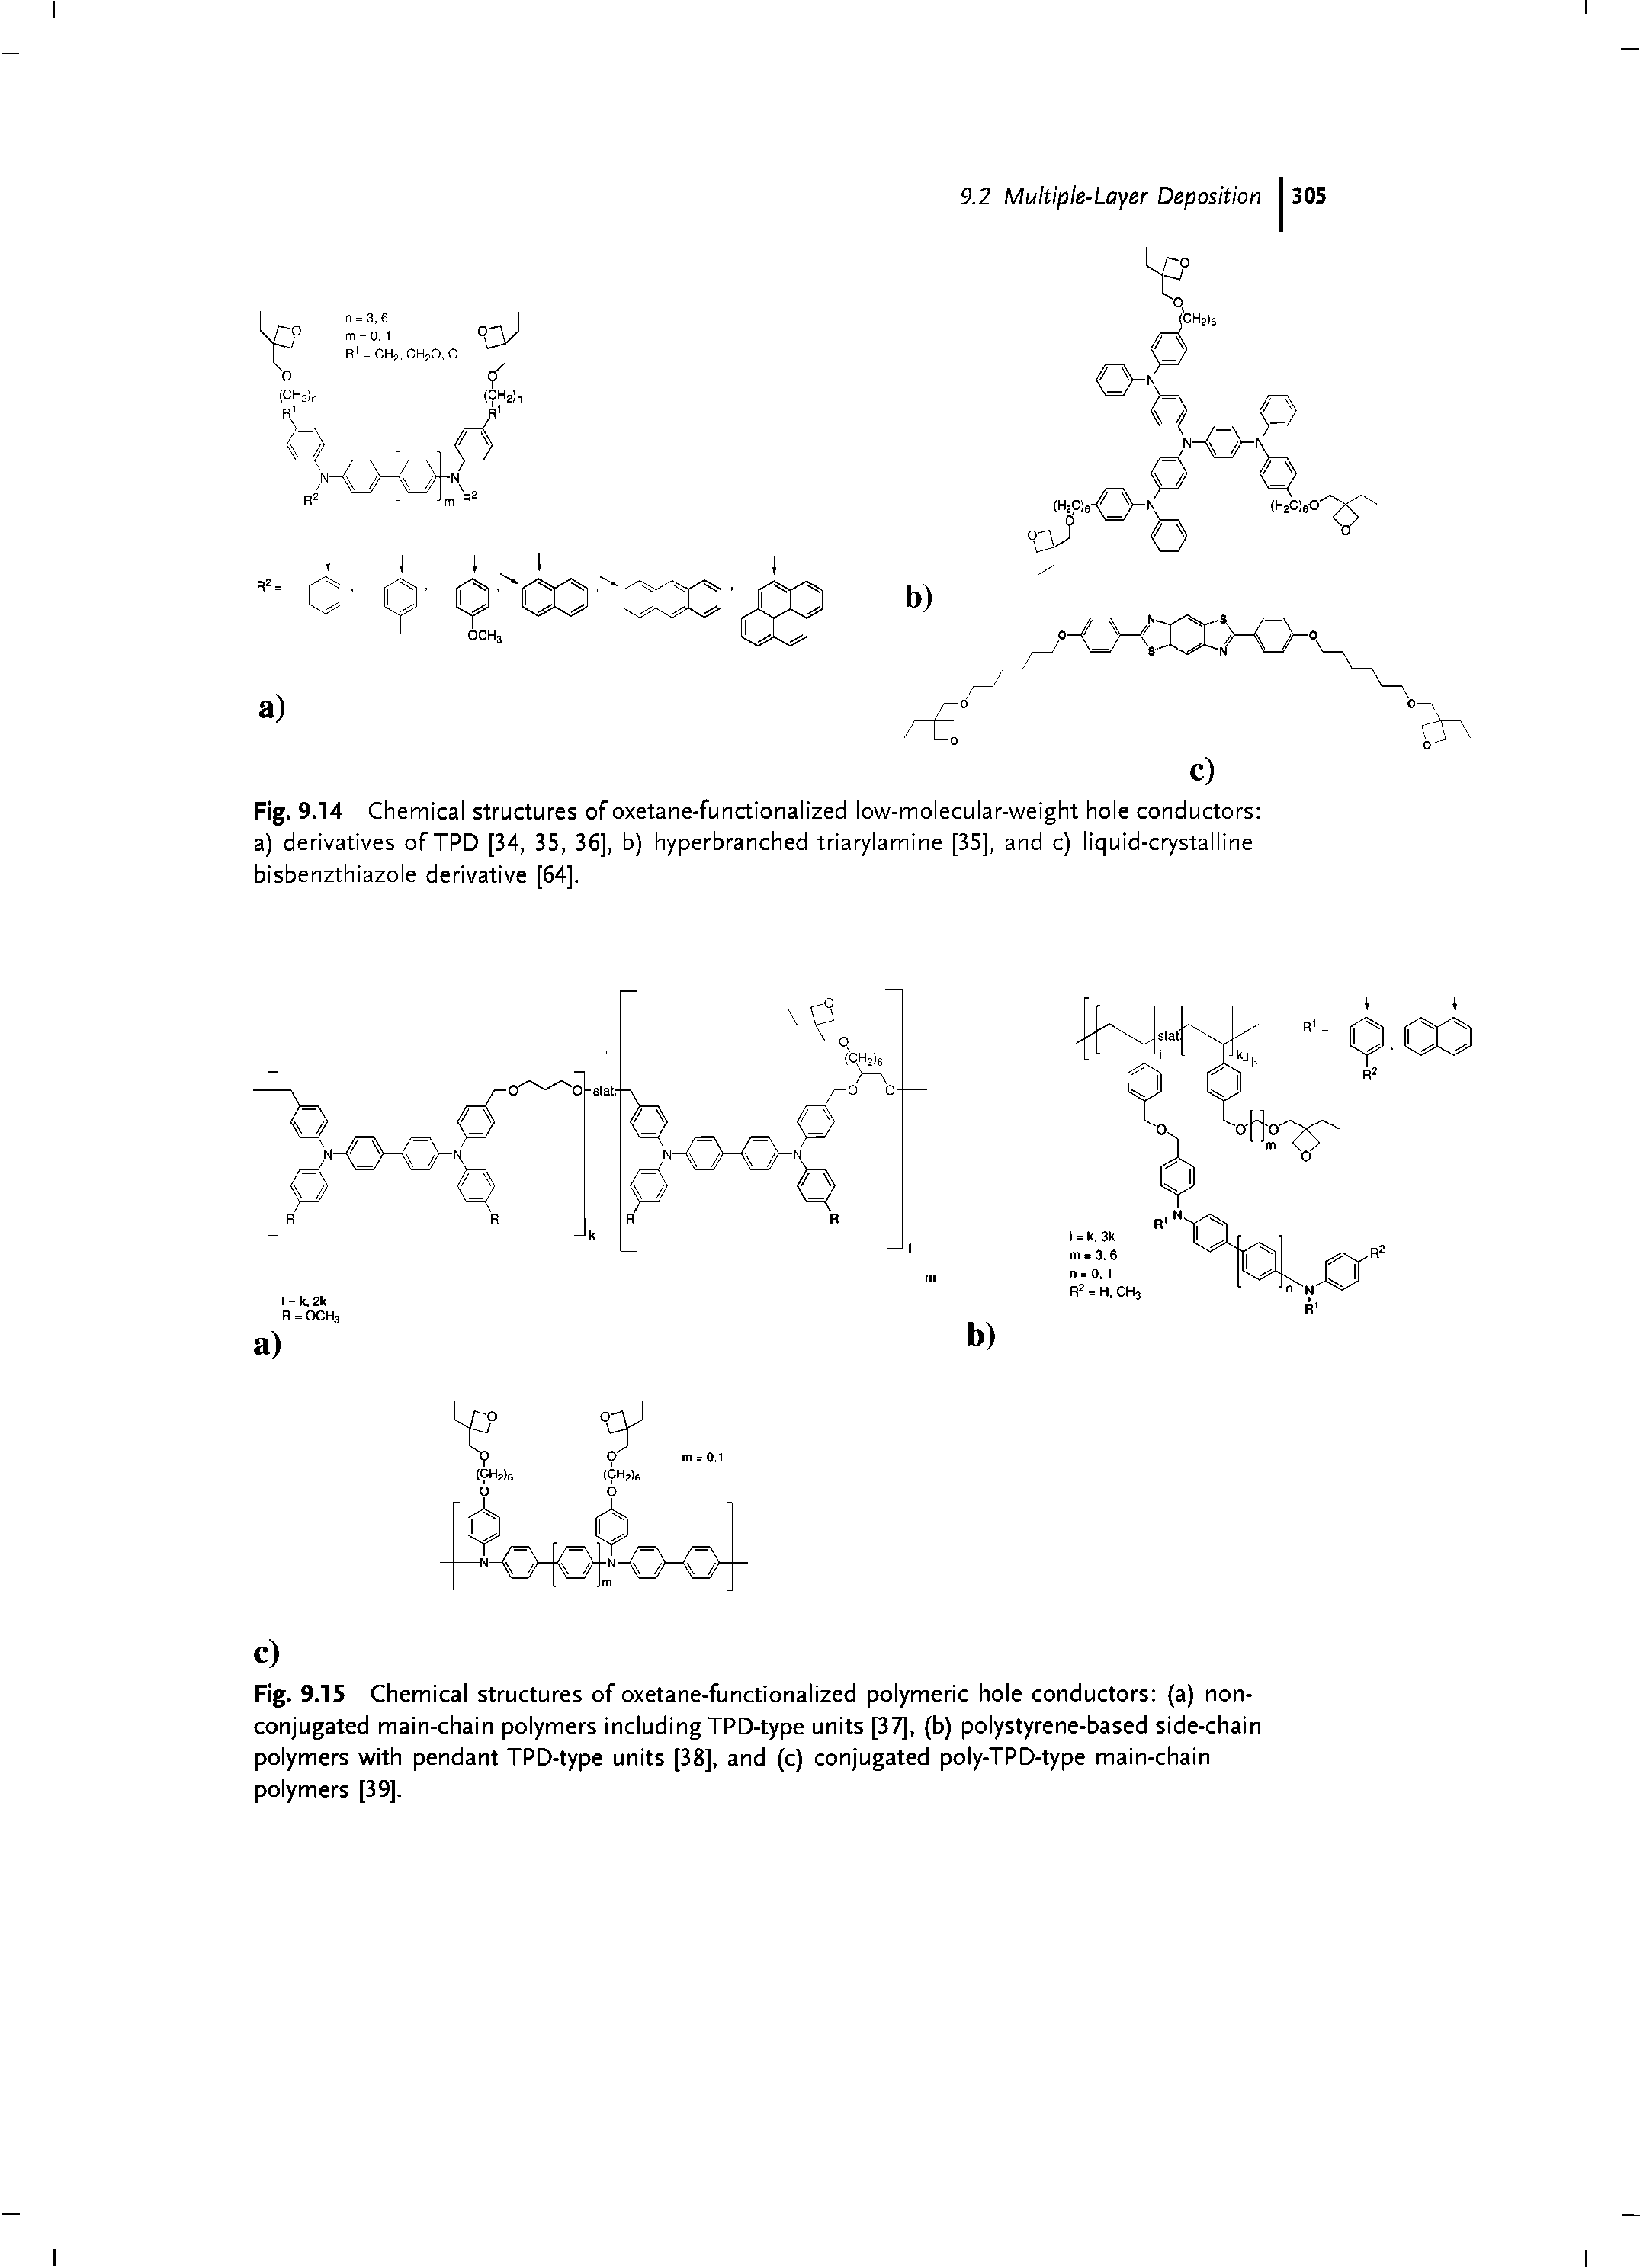 Fig. 9.14 Chemical structures of oxetane-functionalized low-molecular-weight hole conductors a) derivatives ofTPD [34, 35, 36], b) hyperbranched triarylamine [35], and c) liquid-crystalline bisbenzthiazole derivative [64].